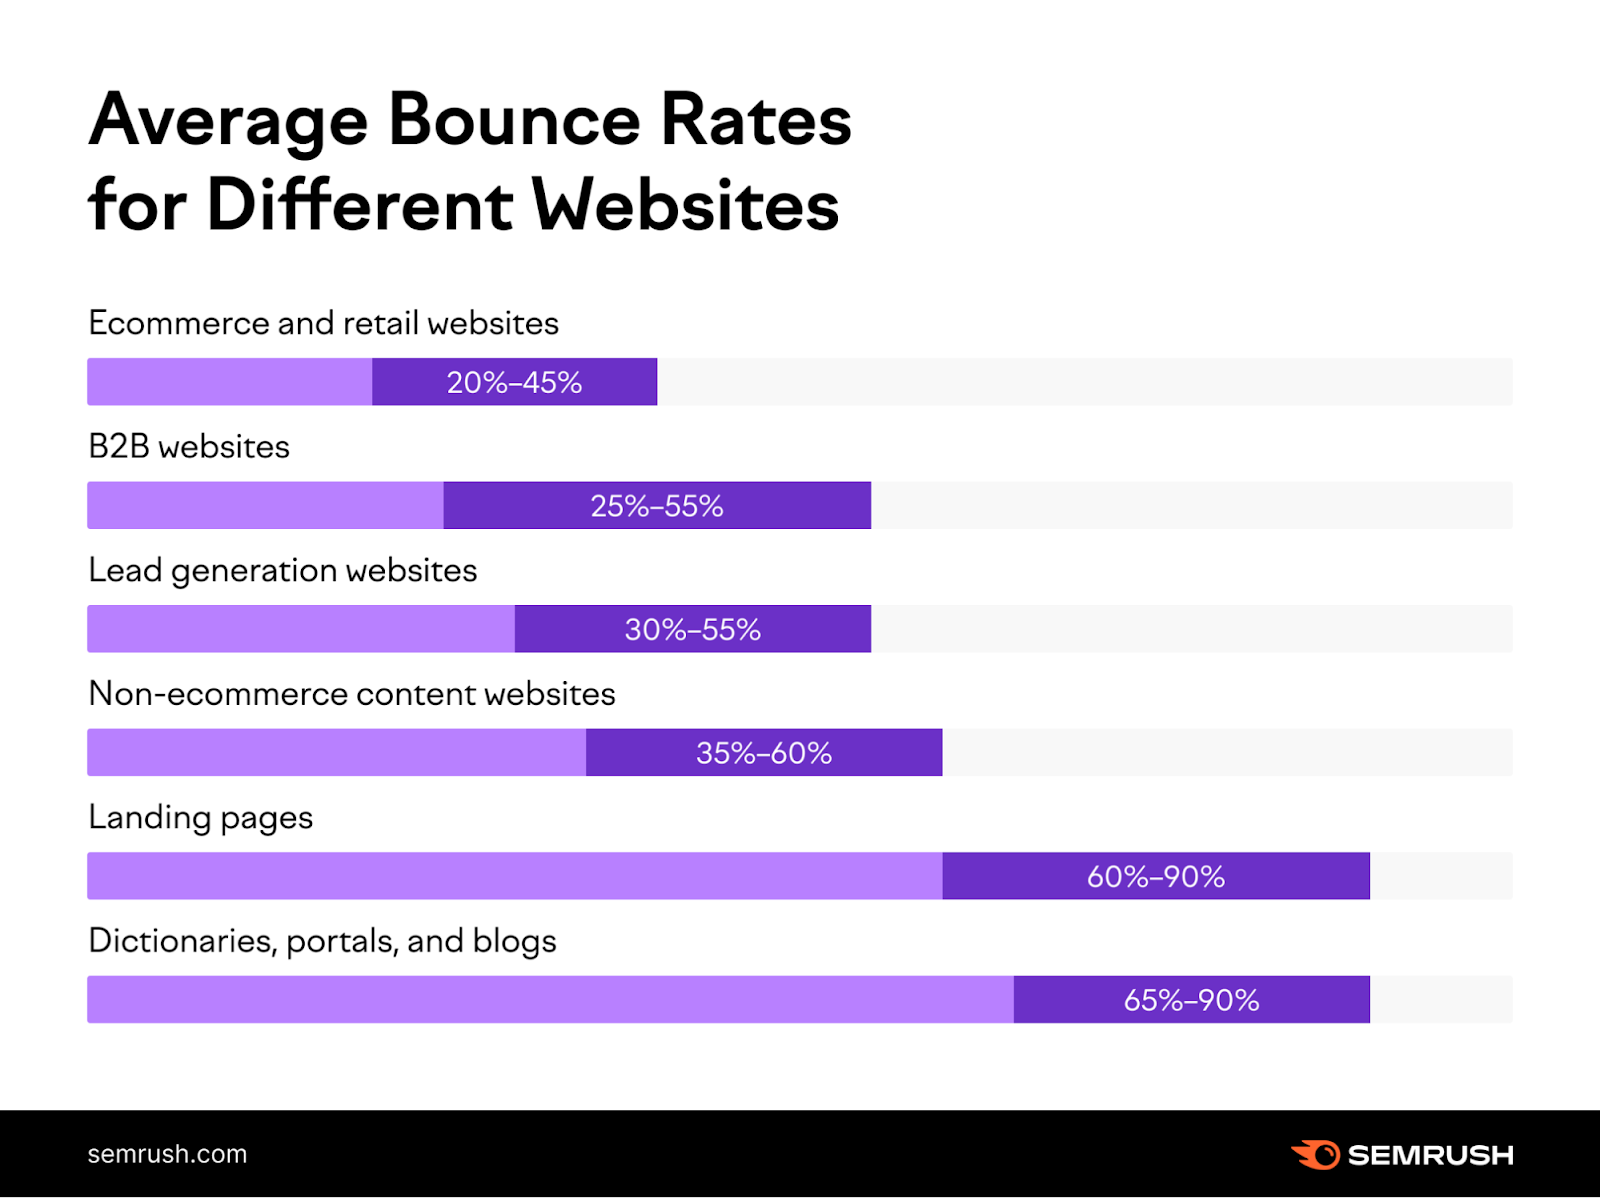 A chart showing average bounce rates for different websites